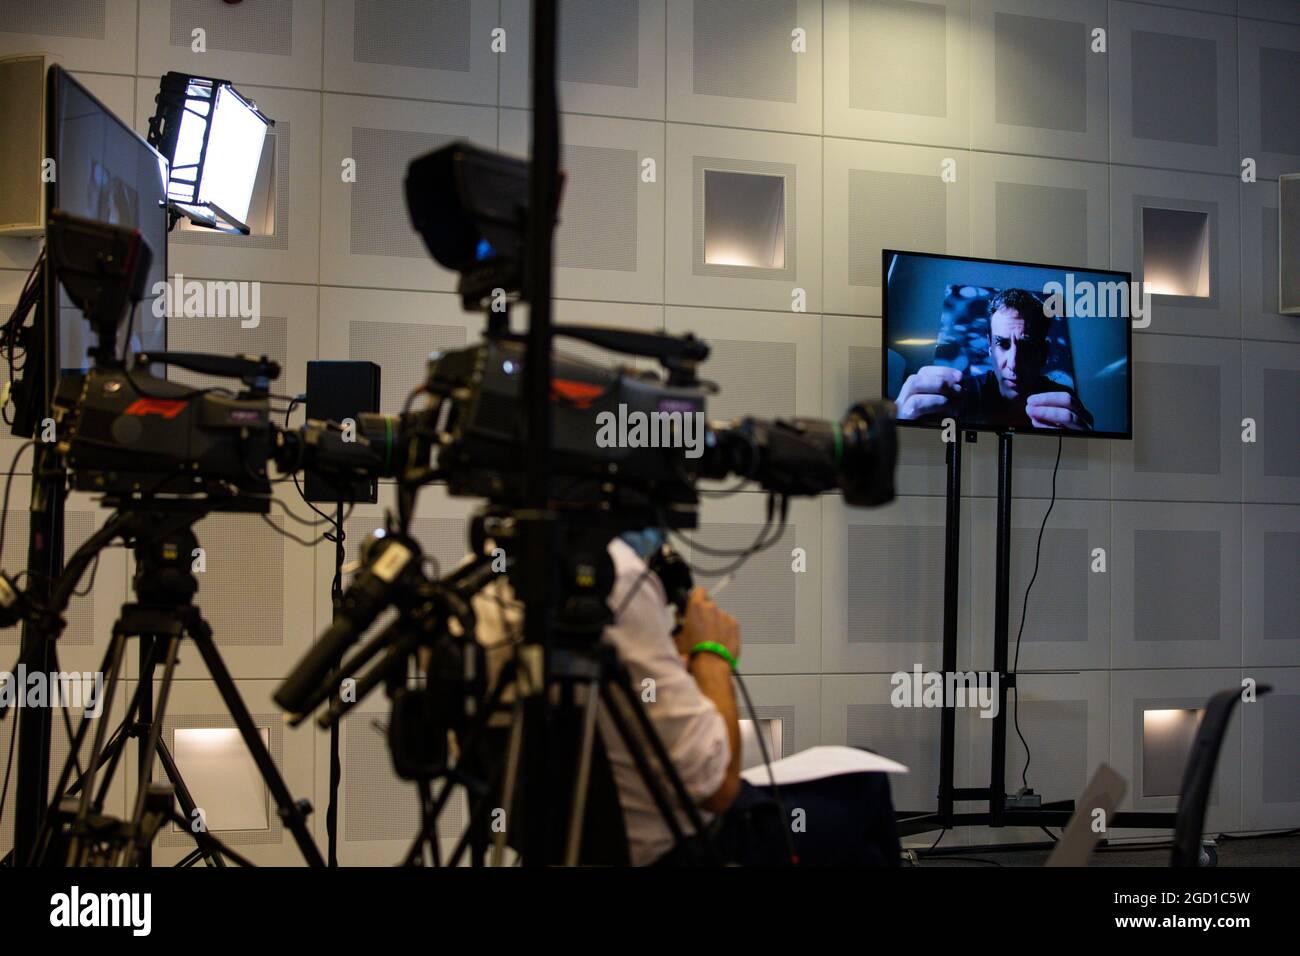 Cyril Abiteboul (FRA) Renault Sport F1 Managing Director remotely in the FIA Press Conference. Abu Dhabi Grand Prix, Friday 11th December 2020. Yas Marina Circuit, Abu Dhabi, UAE. FIA Pool Image for Editorial Use Only Stock Photo